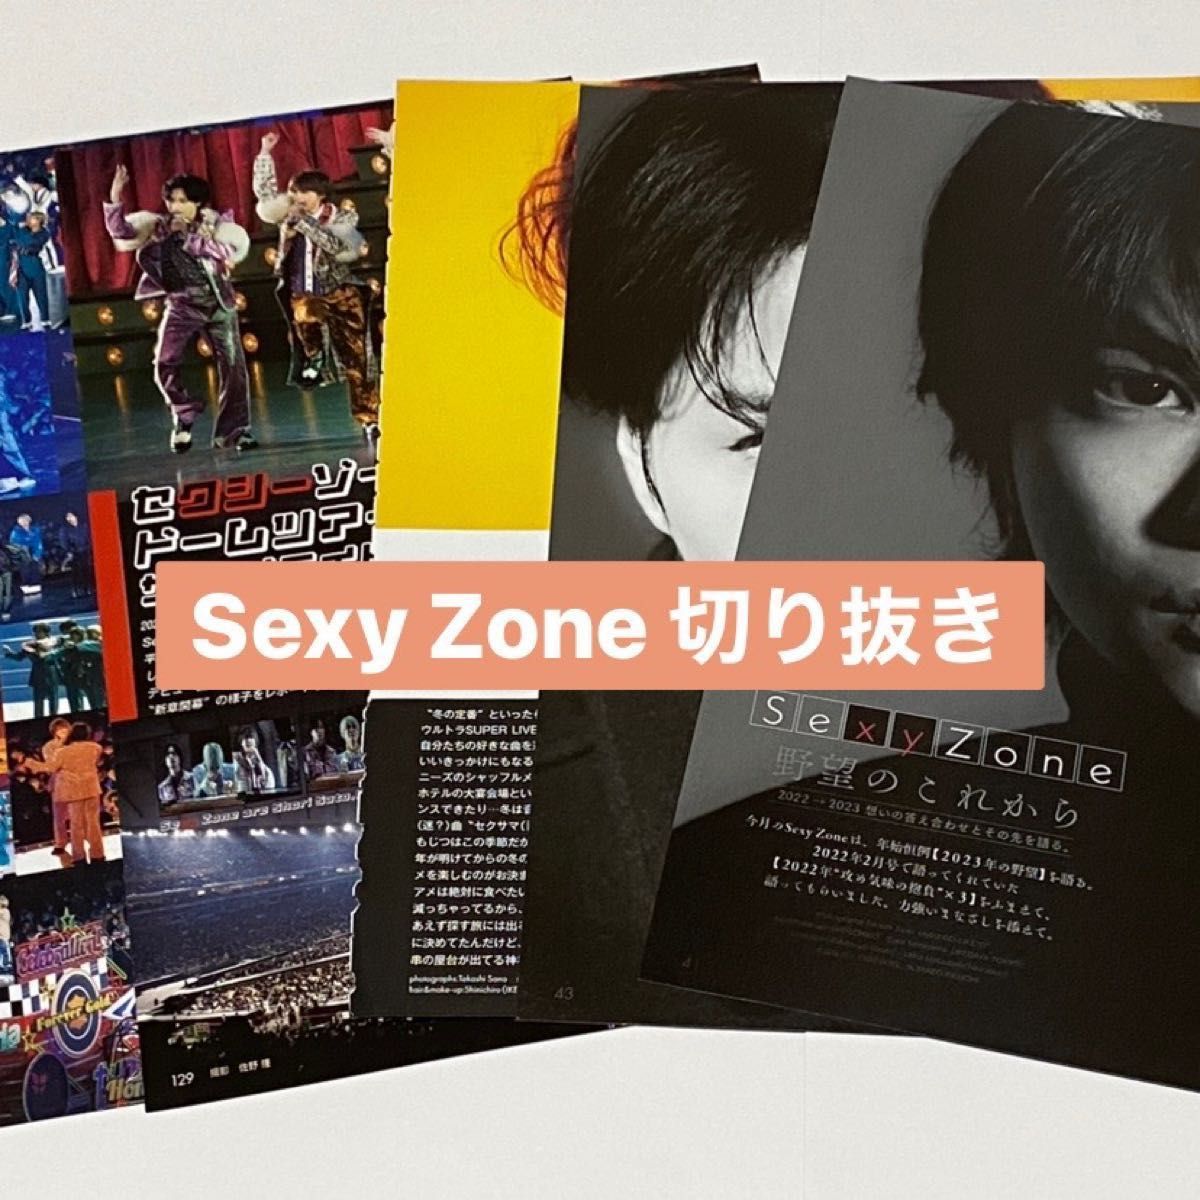 Sexy Zone 雑誌 切り抜き